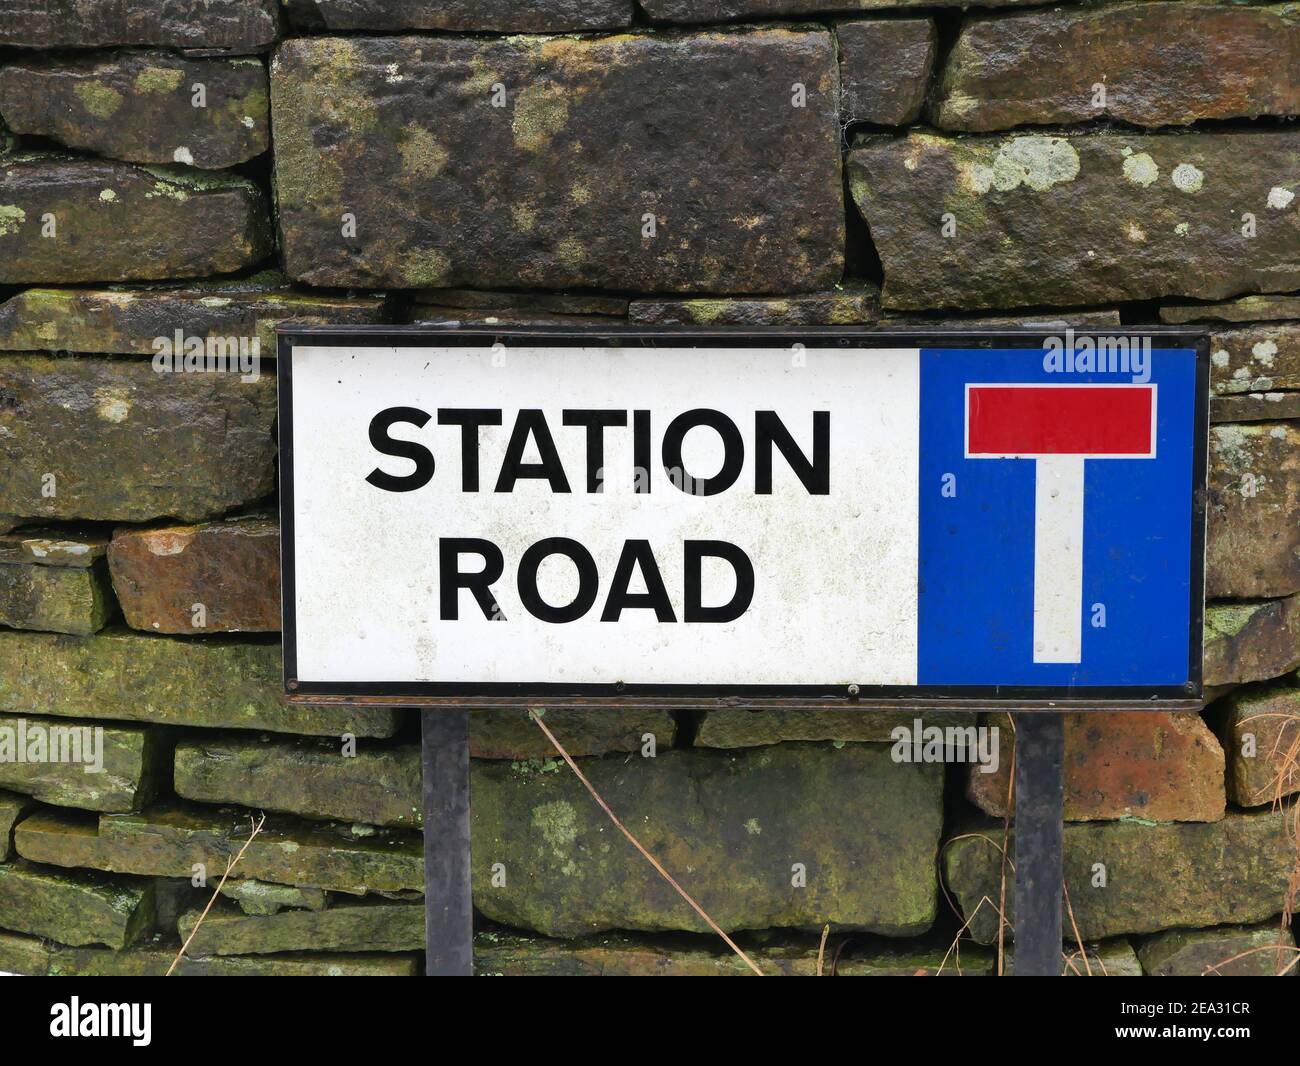 Station road roadside sign black letters and border on white ground red and white letter T on blue square stood against stone wall on metal legs Stock Photo